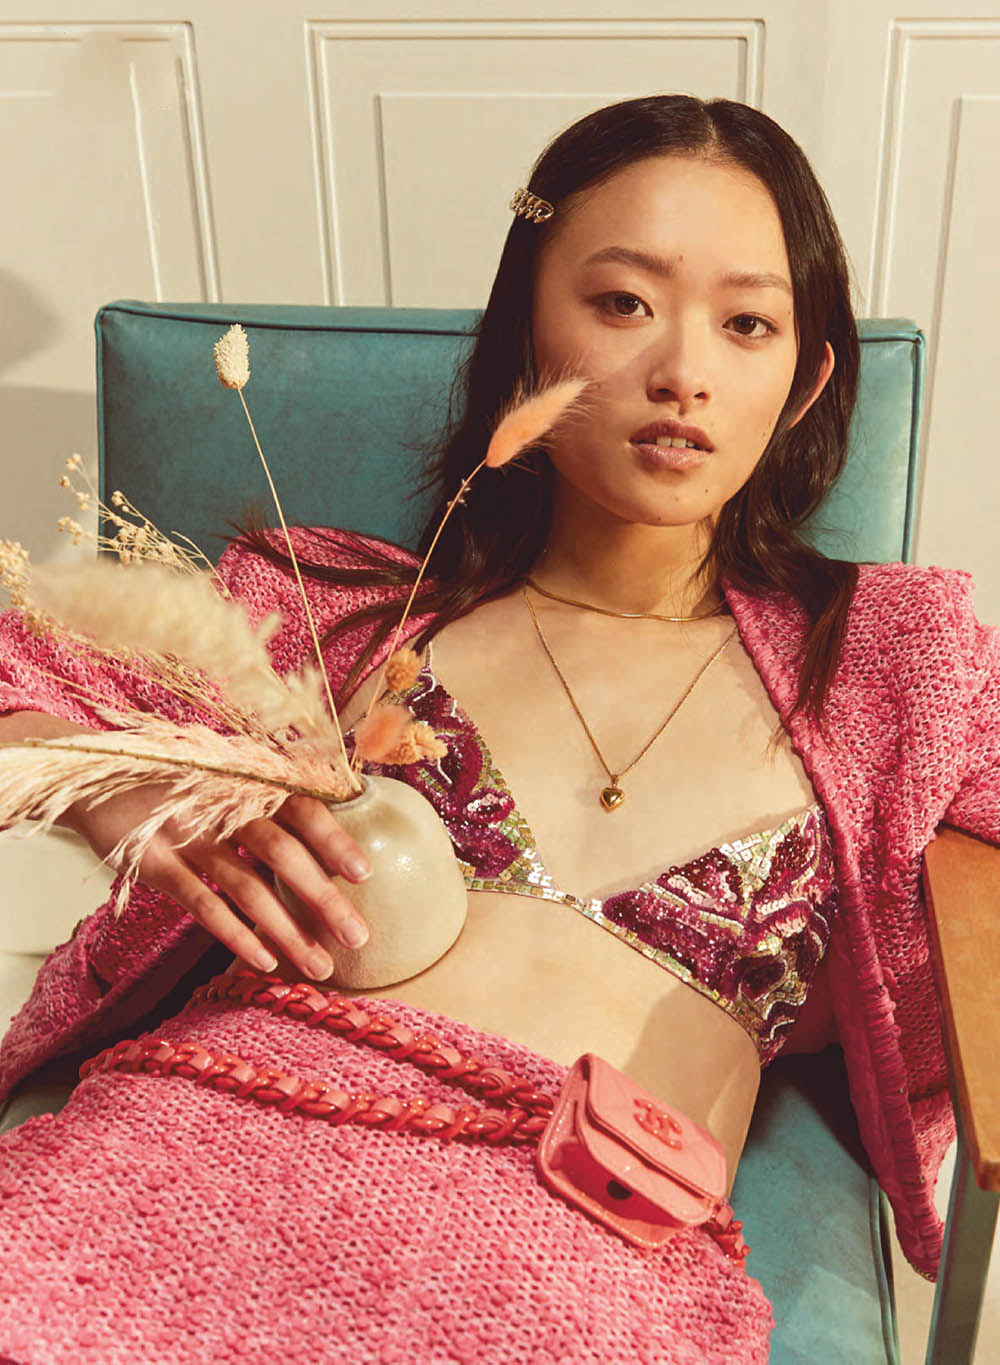 Julee Huang and Samara Young by Brent Goldsmith for Elle Canada December 2020 January 2021